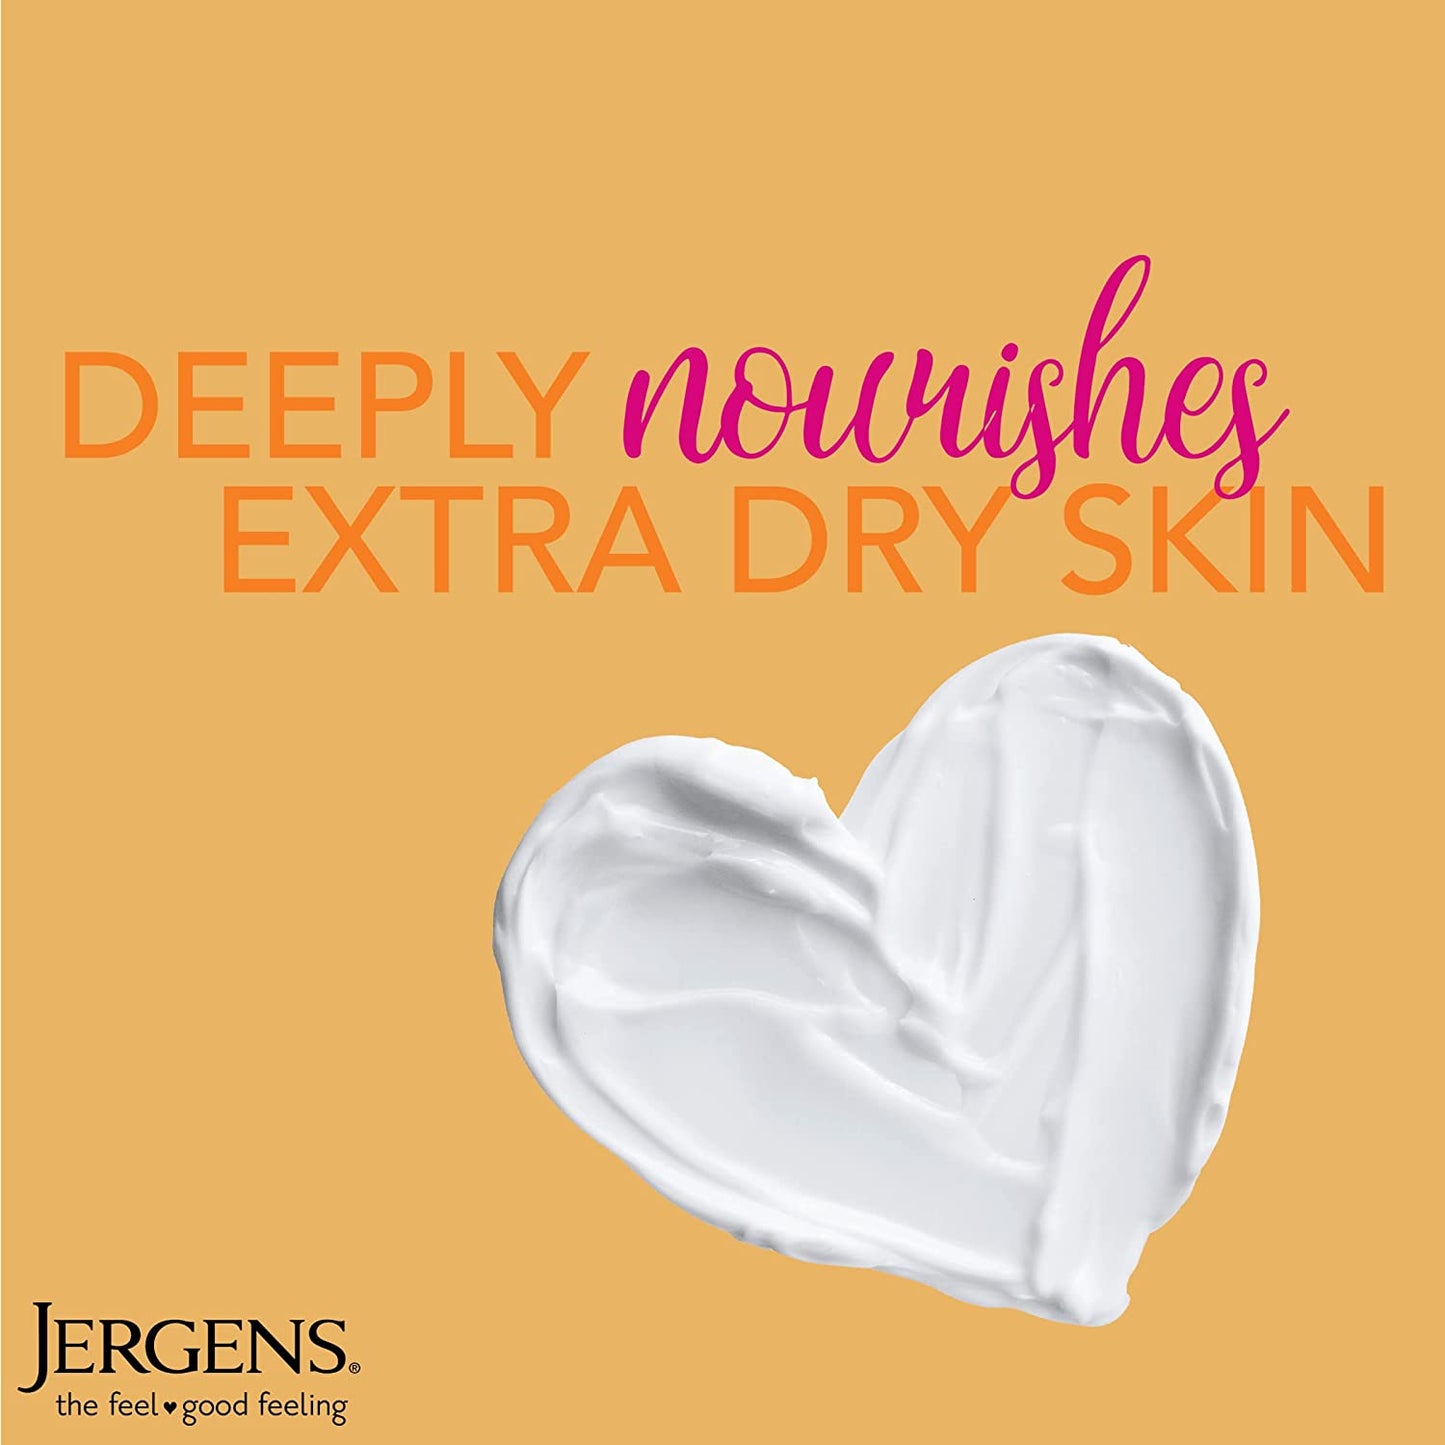 Jergens - Healing Dry Skin Moisturizer - Body and Hand Lotion for Dry Skin With HYDRALUCENCE Blend Vitamins C, E, B5